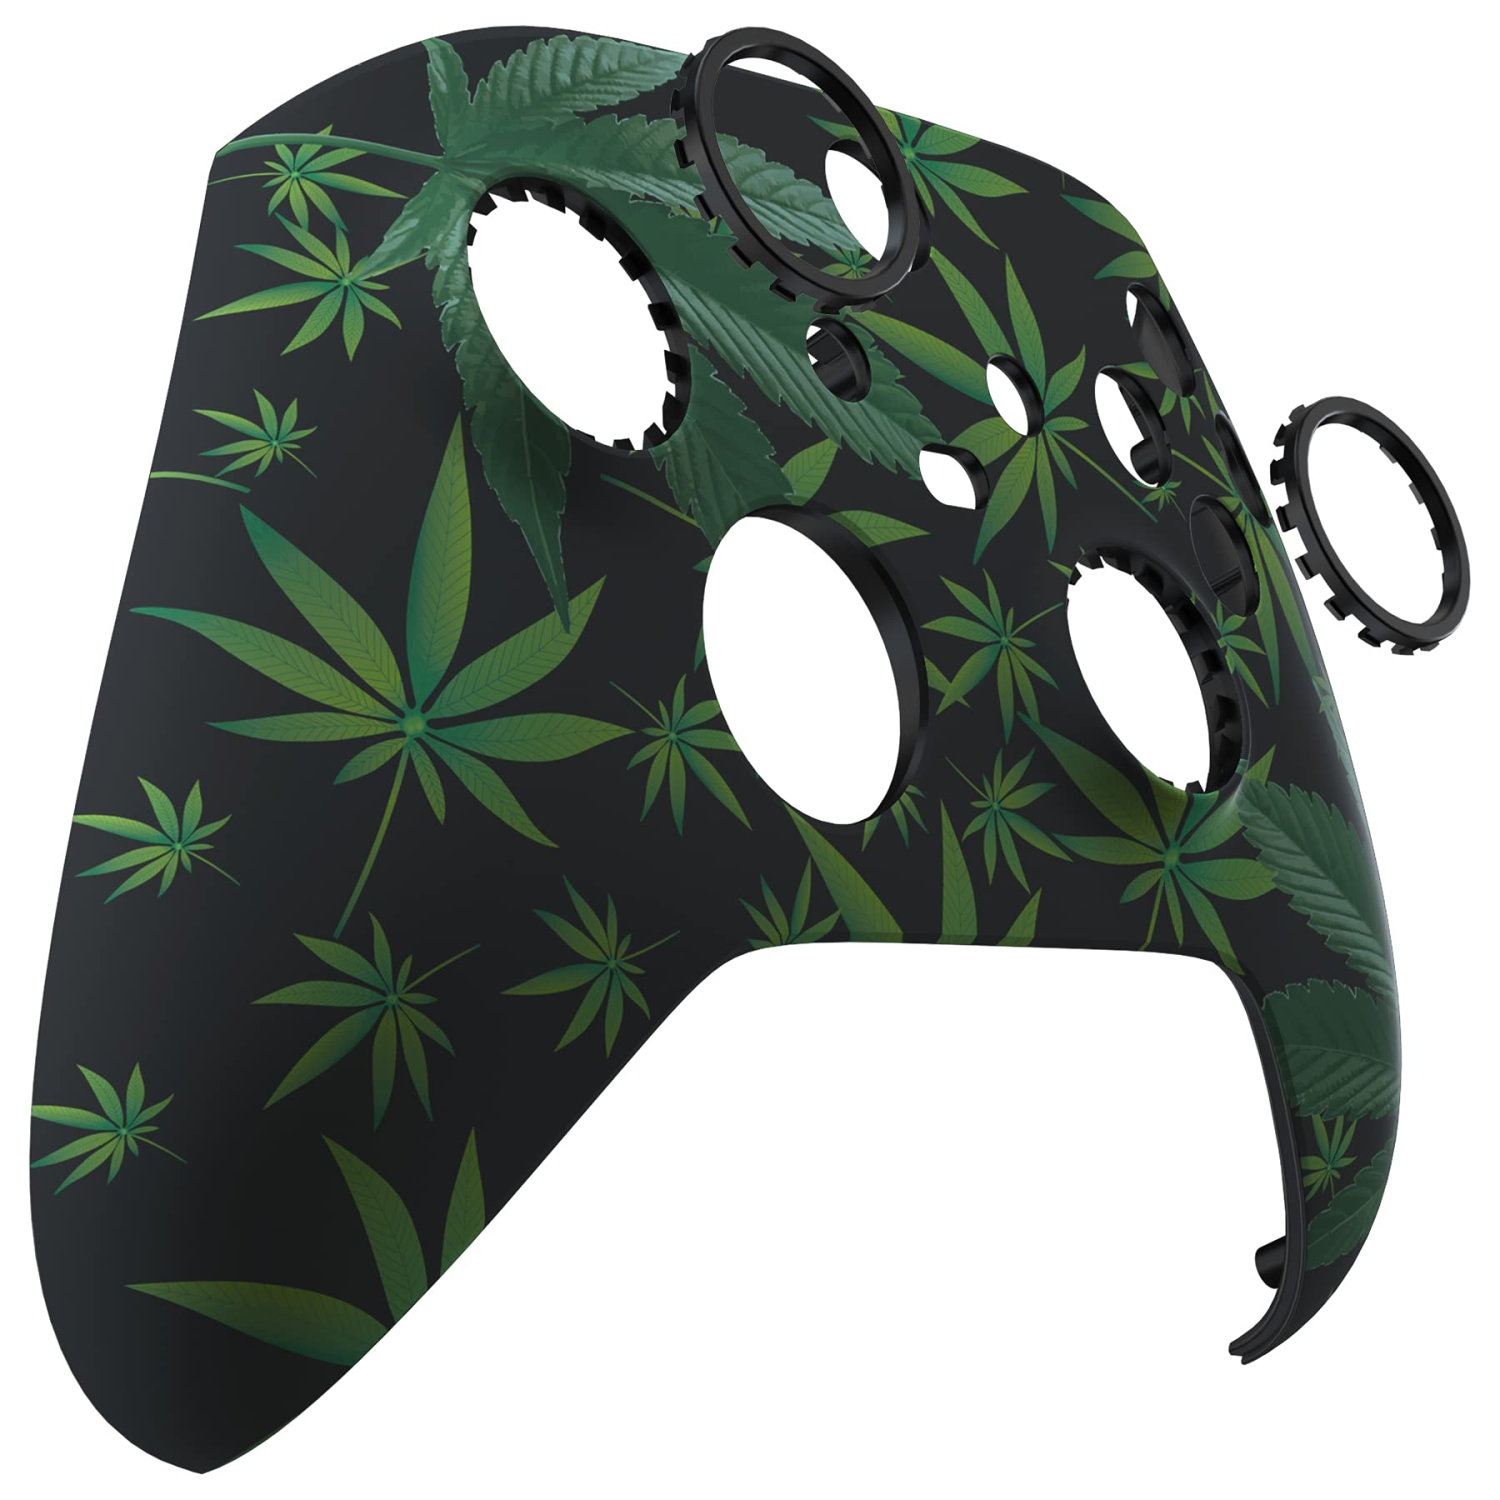 Green Weeds ASR Version Front Housing Shell w/Accent Rings for Xbox Series X/S Controller, Custom Soft Touch Cover Faceplate for Xbox Core Controller Model 1914